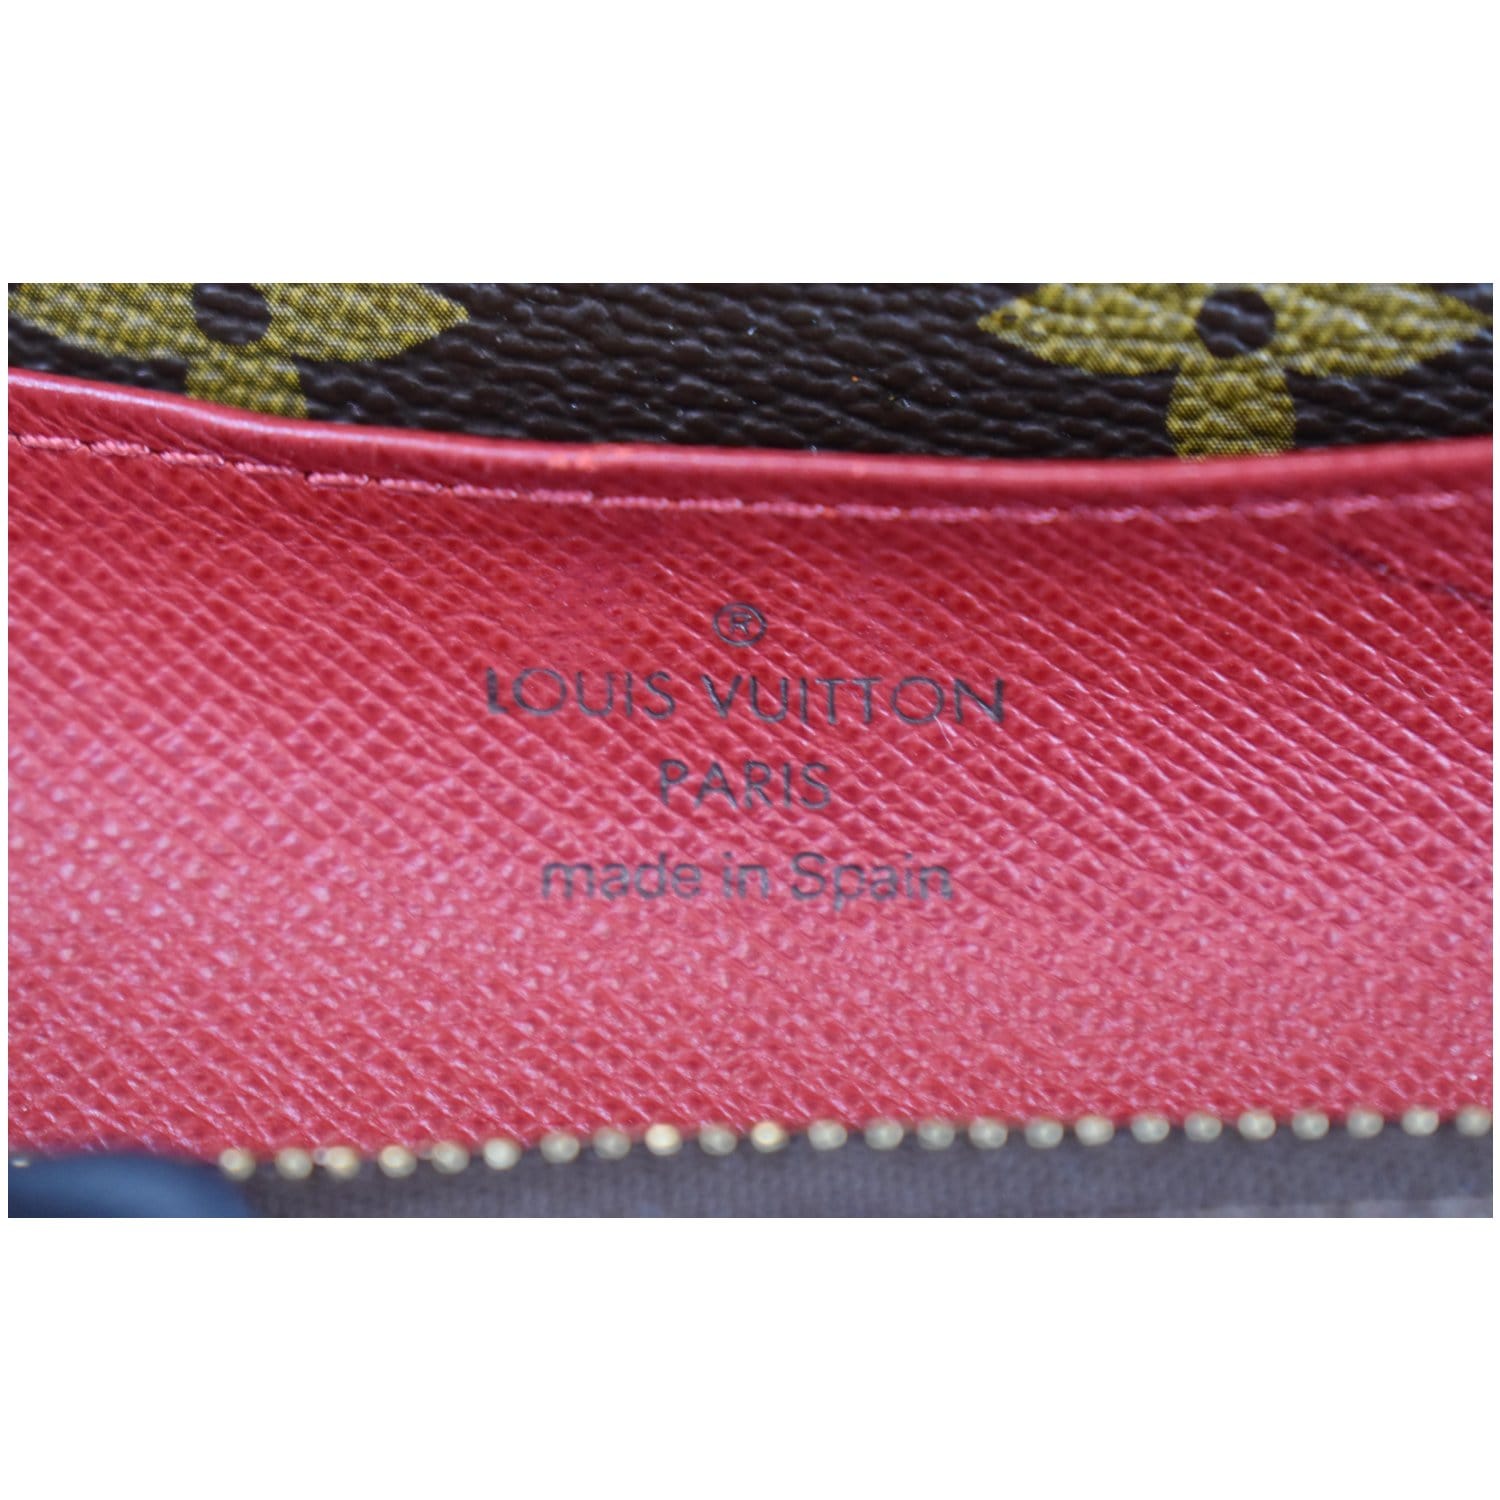 Emilie wallet Louis Vuitton Brown in Other - 20174958